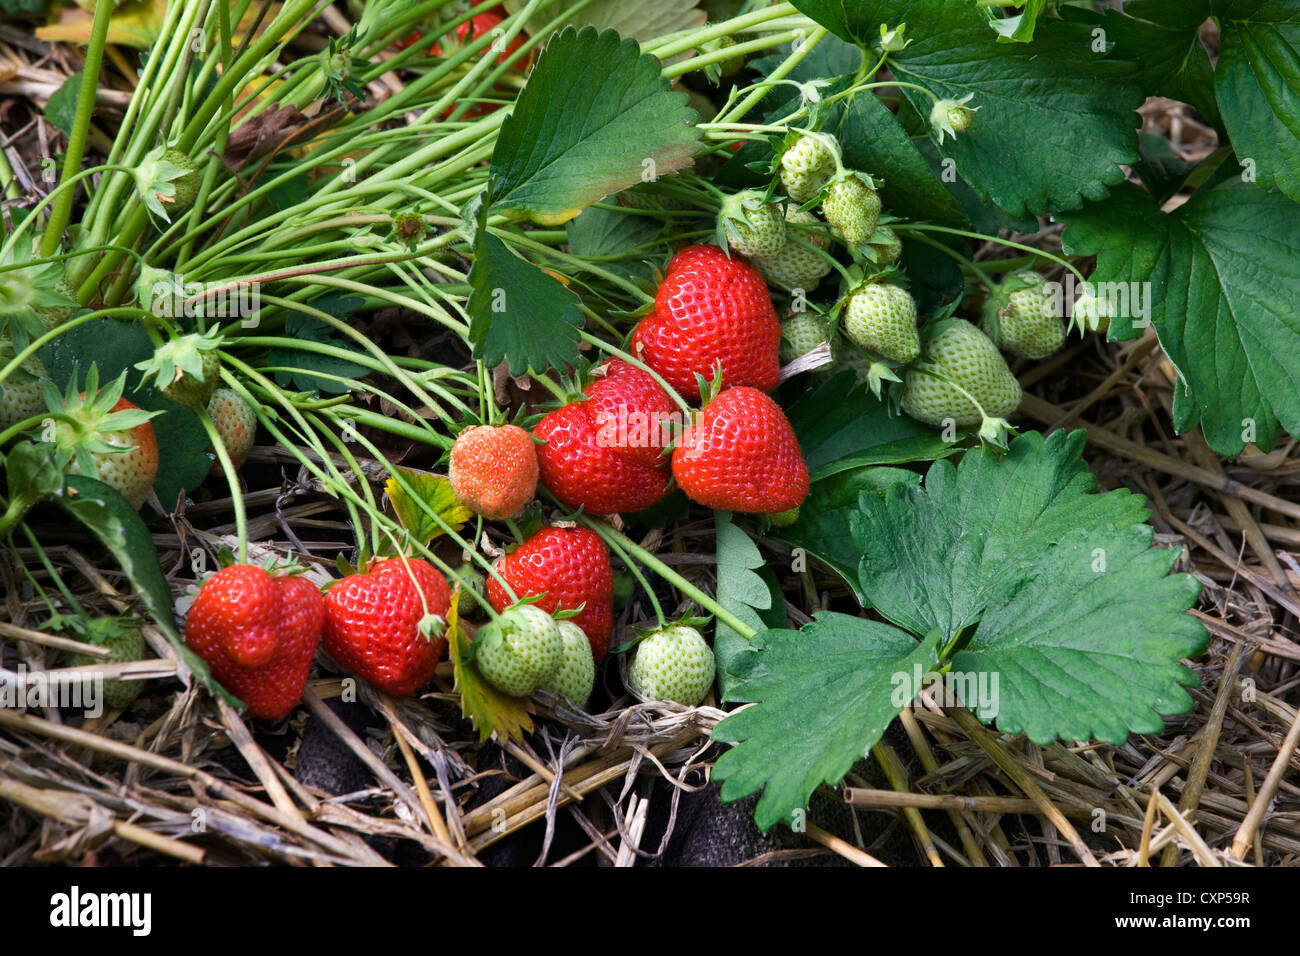 Cultivation of strawberries (Fragaria) on straw in greenhouse Stock Photo